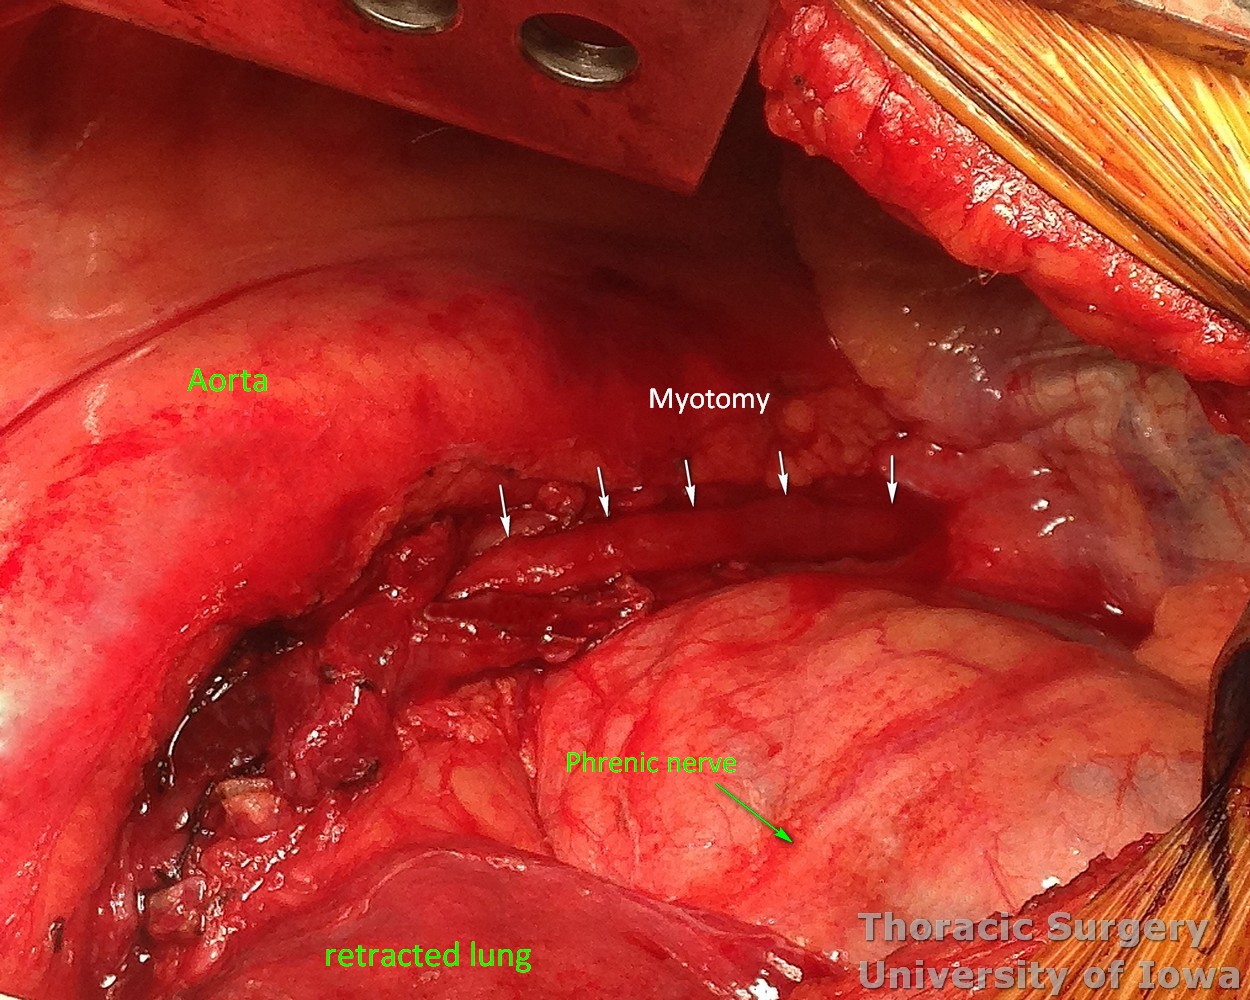 Esophageal diverticula midesophageal  and epiphrenic  extent of myotomy after diverticulectomy chest anatomy demonstrated